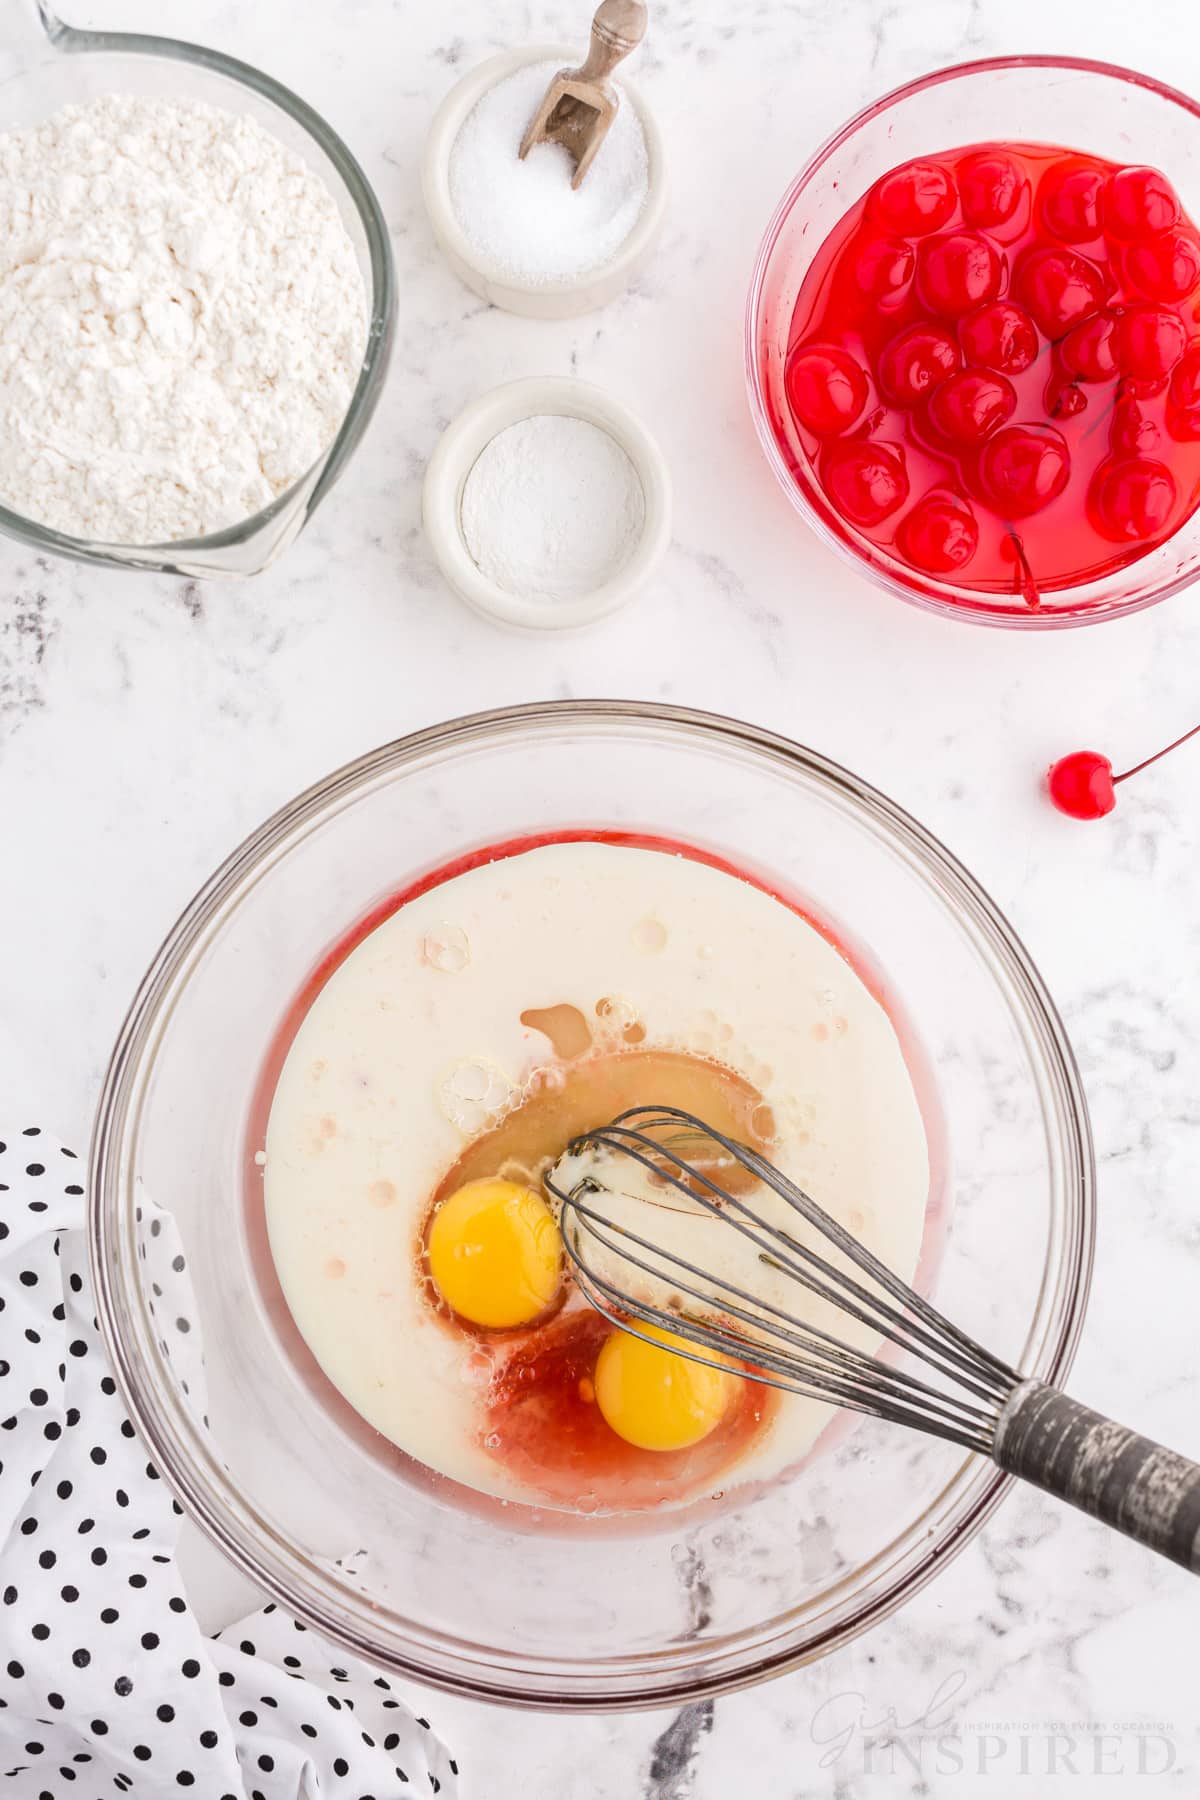 eggs, cherry juice and sugar in a mixing bowl with whisk next to cherries, sugar, and flour for cherry bread